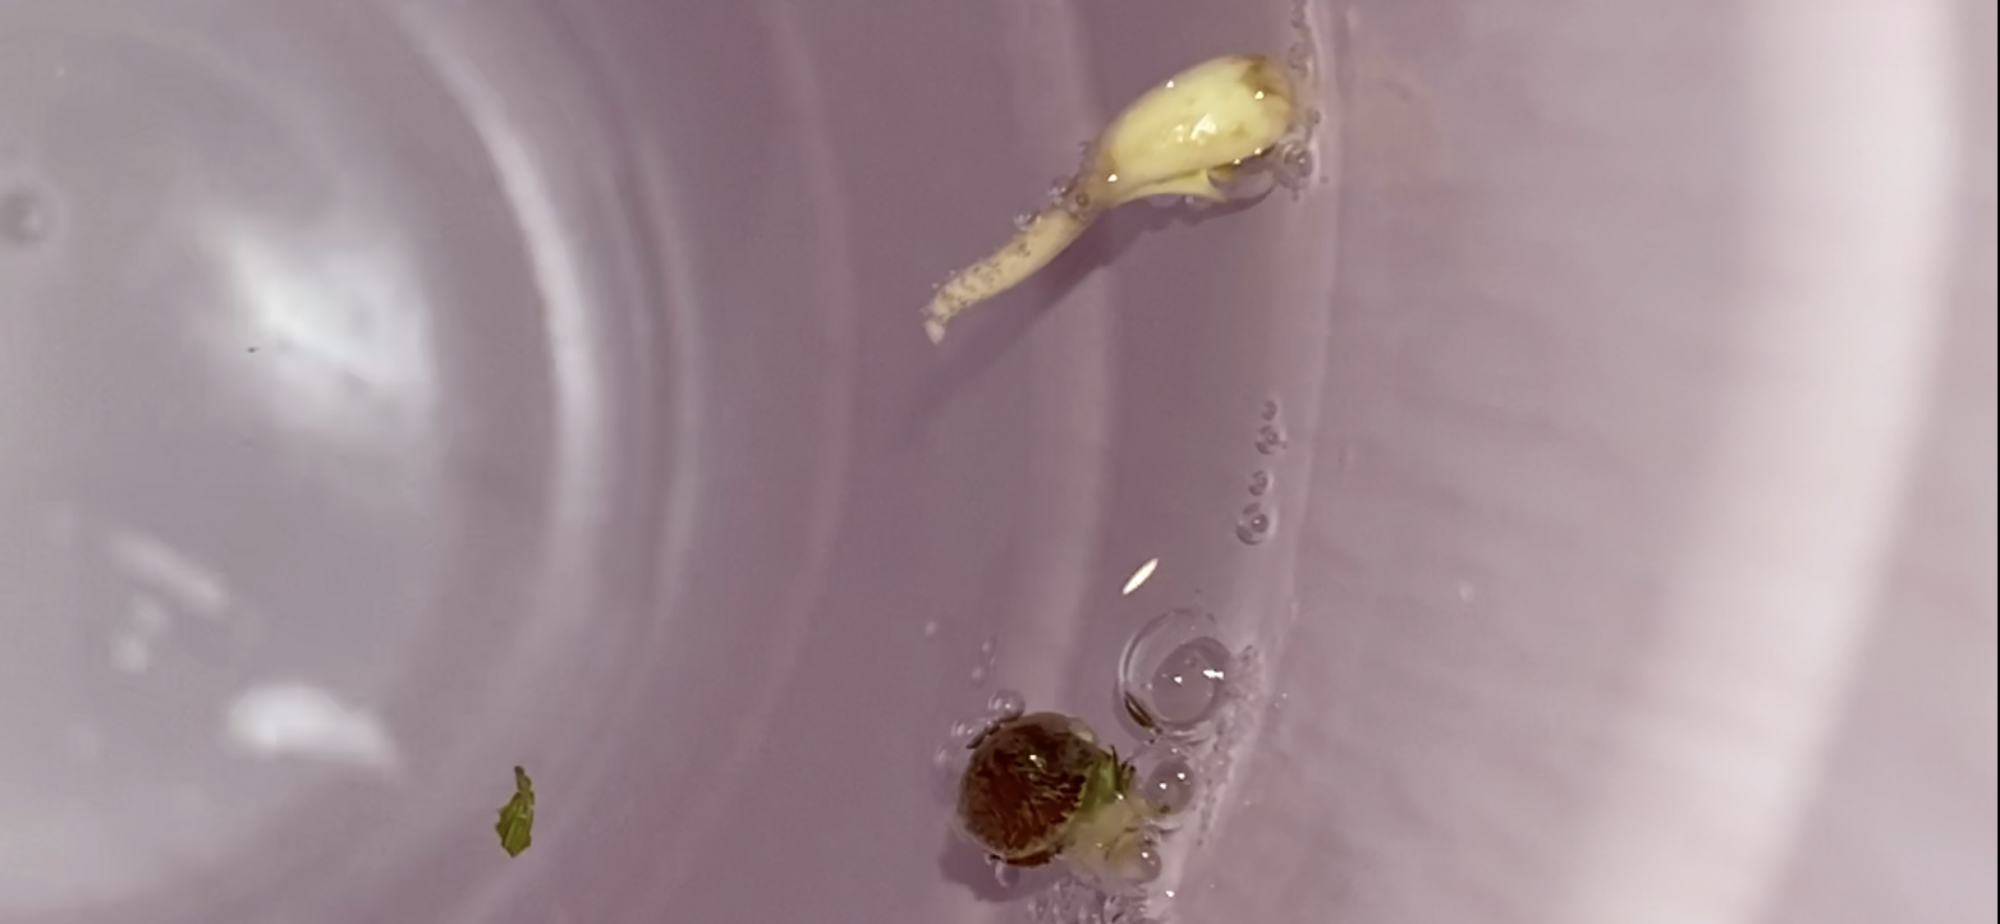 Seed pod released embryo in water